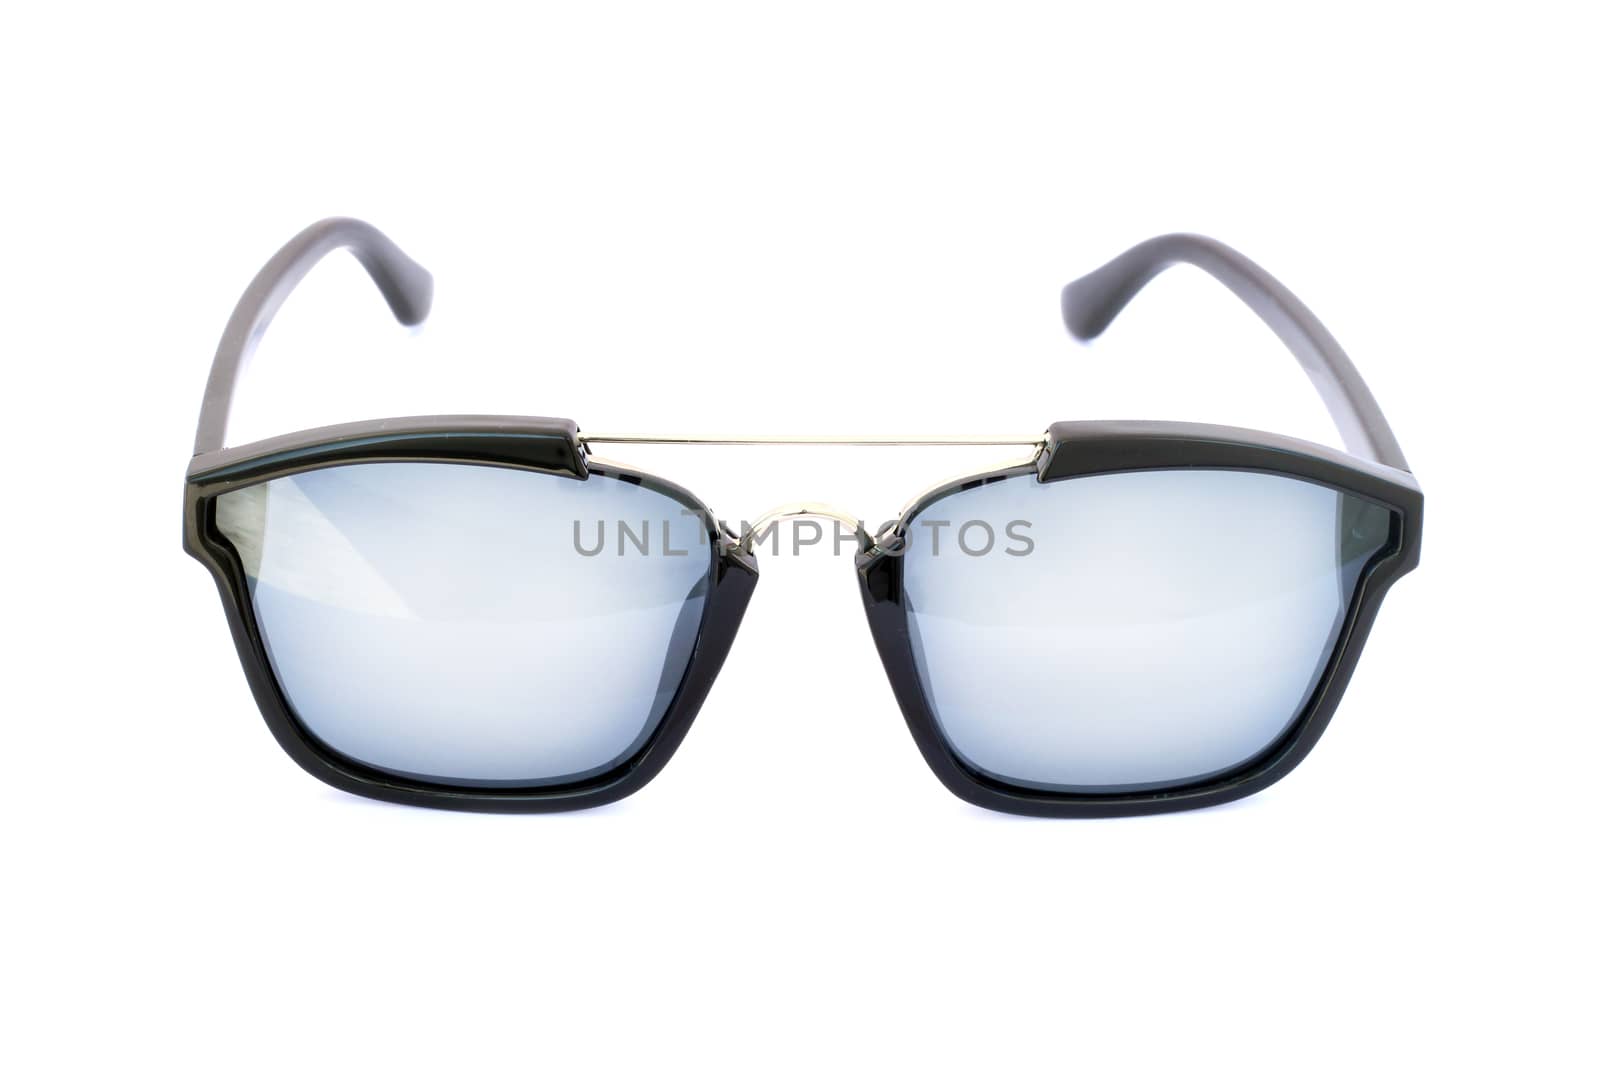 Image of black glasses on a white background by yod67